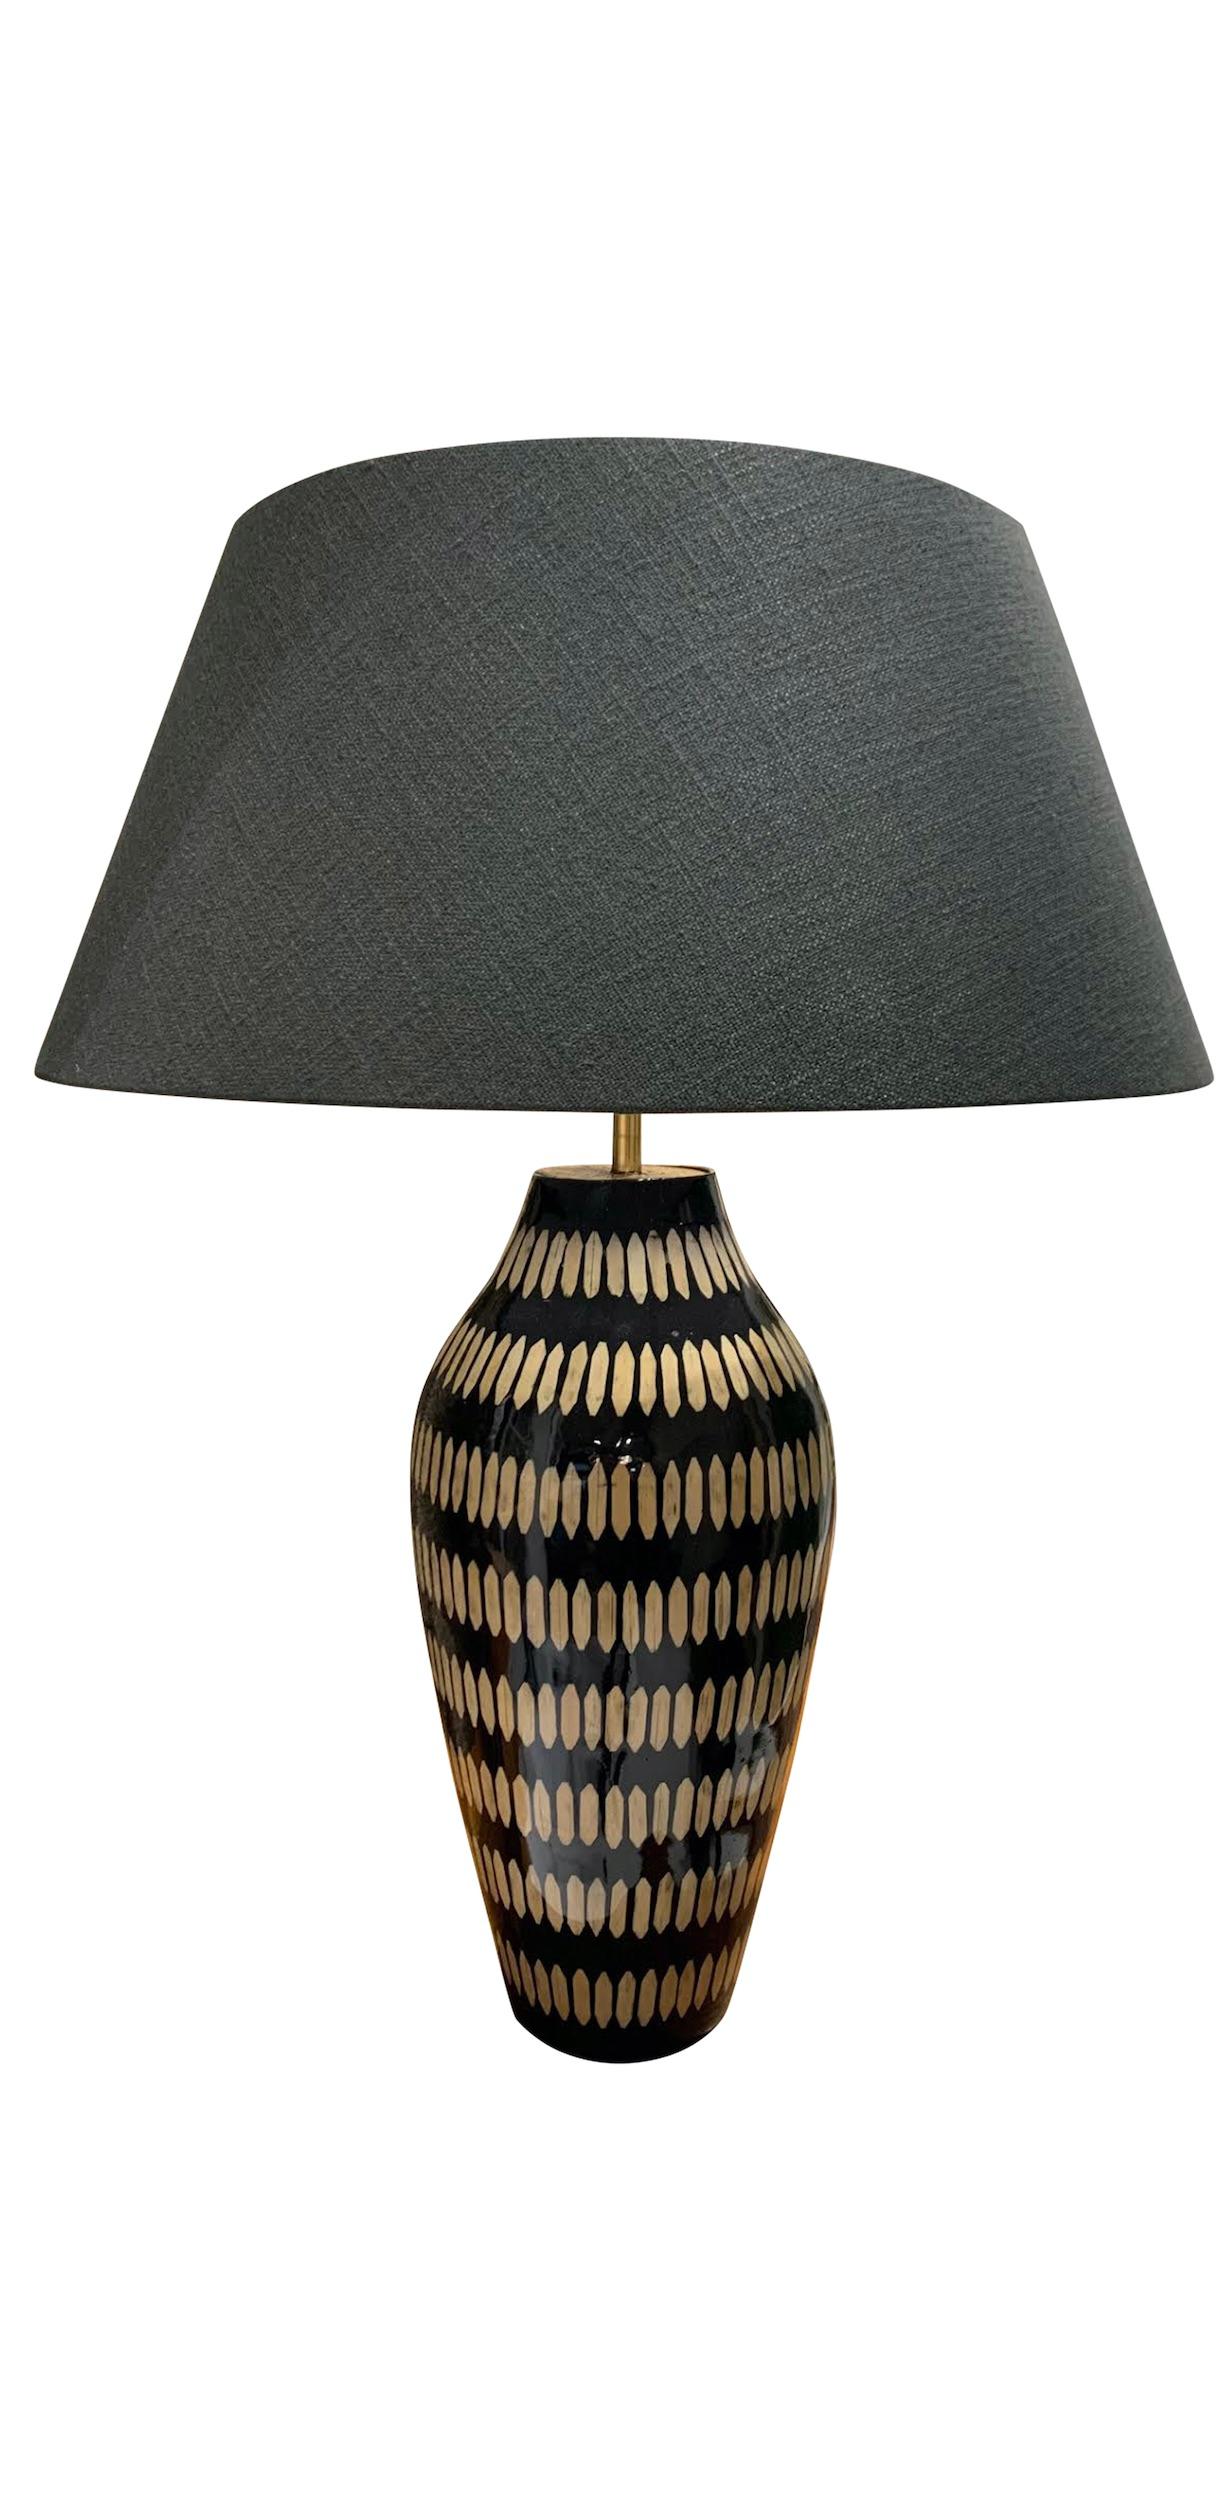 Contemporary Chinese pair of lacquered bamboo lamps.
Black ground with cream vertical dash design.
Base measures 9